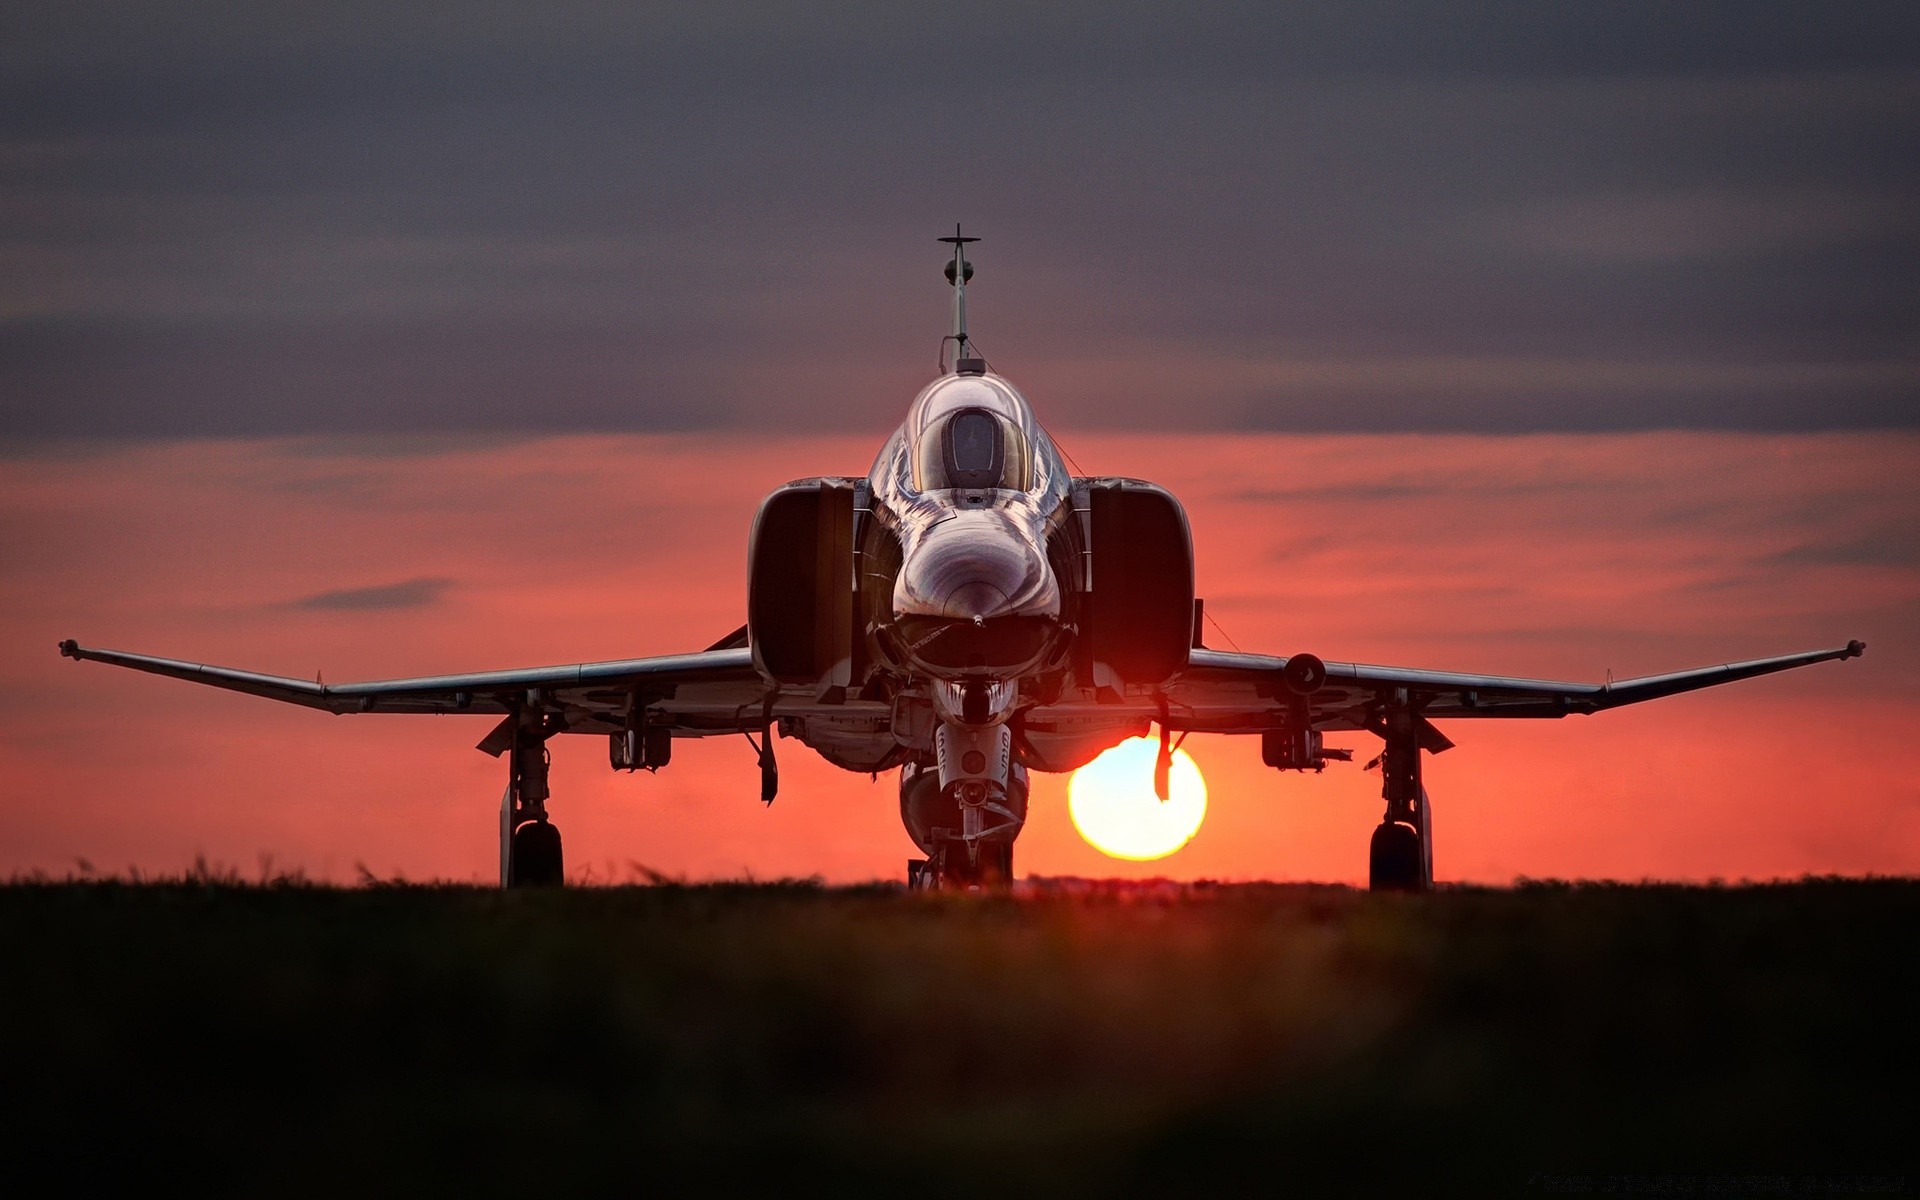 aviation aircraft airplane vehicle military transportation system sky sunset silhouette airport war